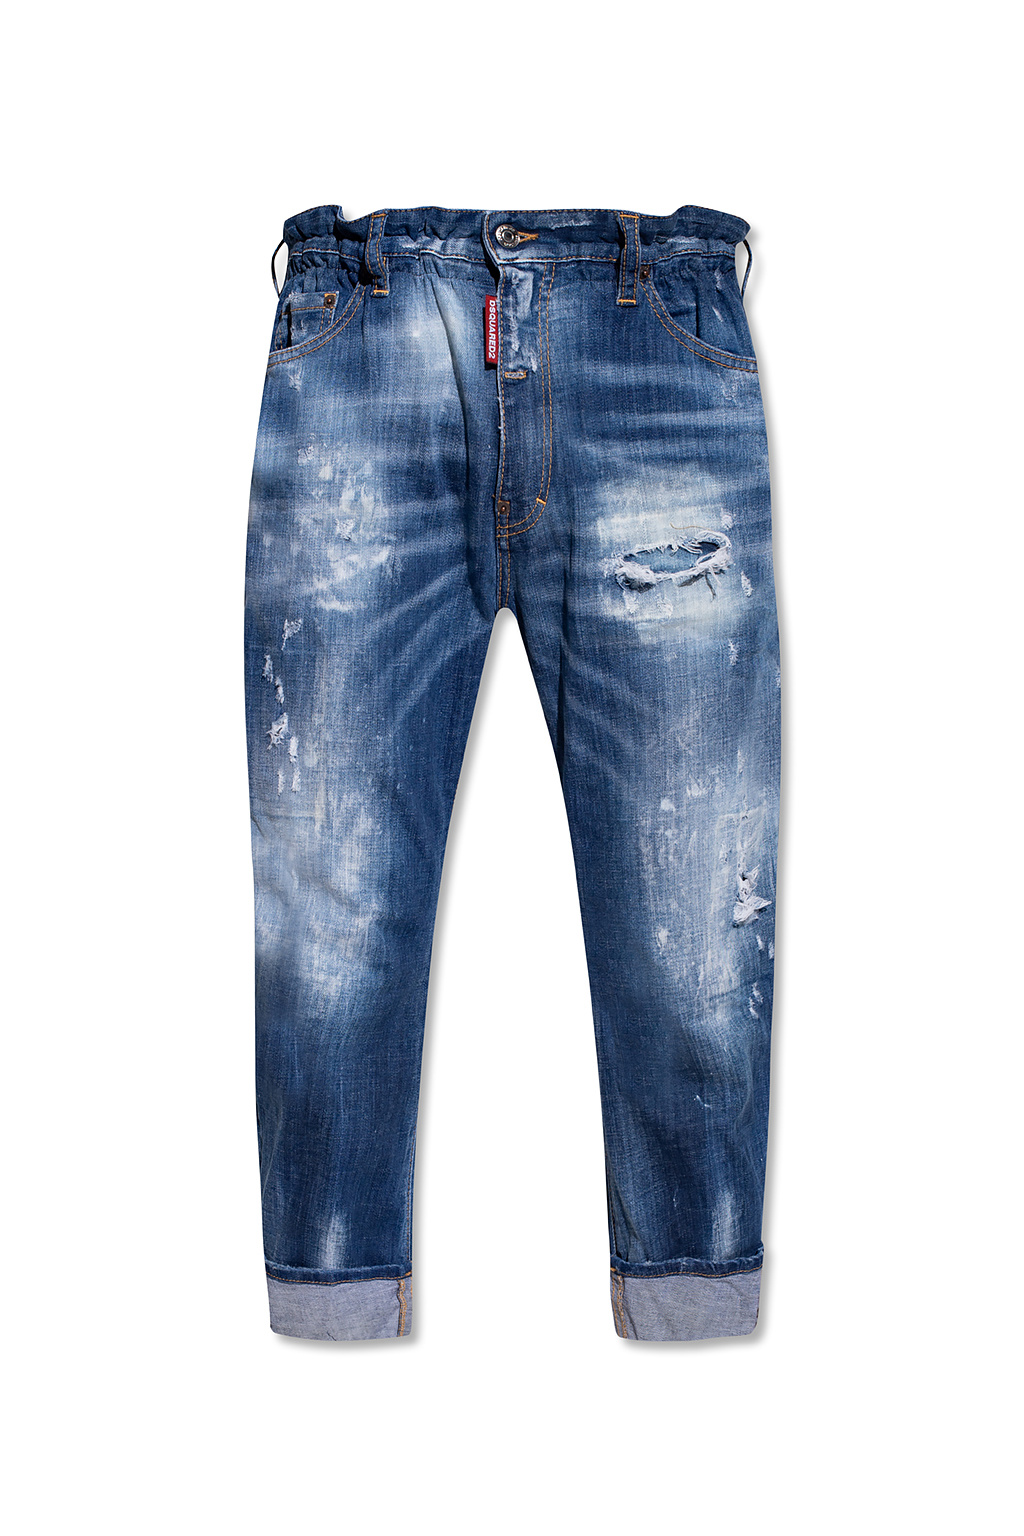 Dsquared2 'Big Dean's Brother' jeans | Men's Clothing | Vitkac